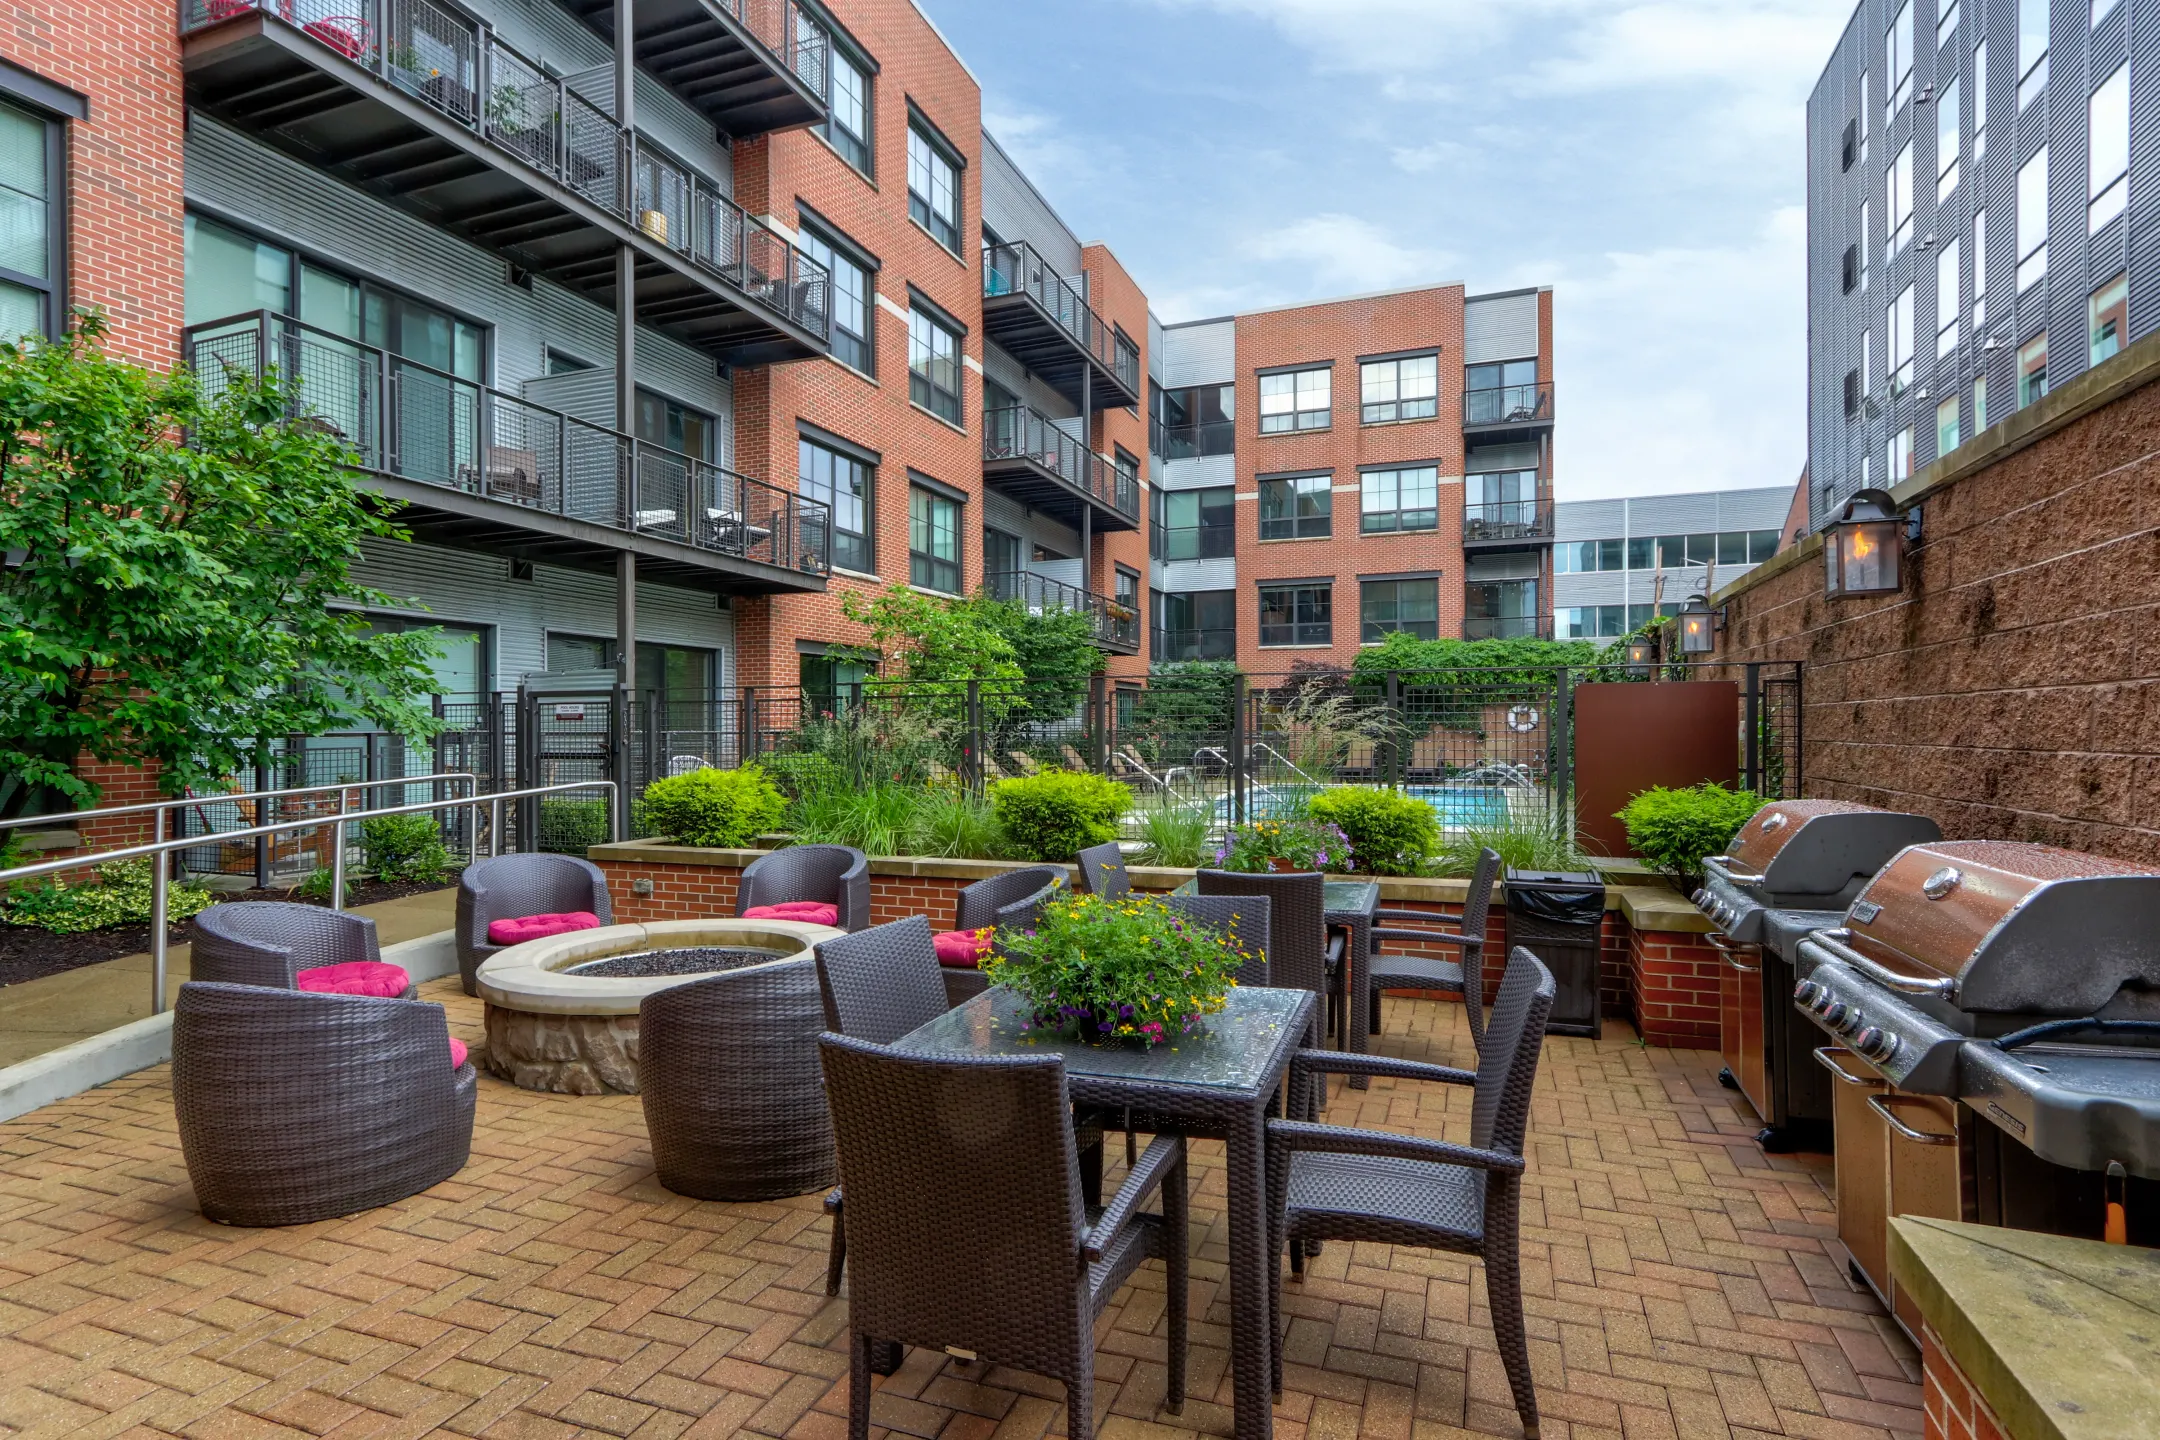 Patio / Deck - Lot 24 - Pittsburgh, PA